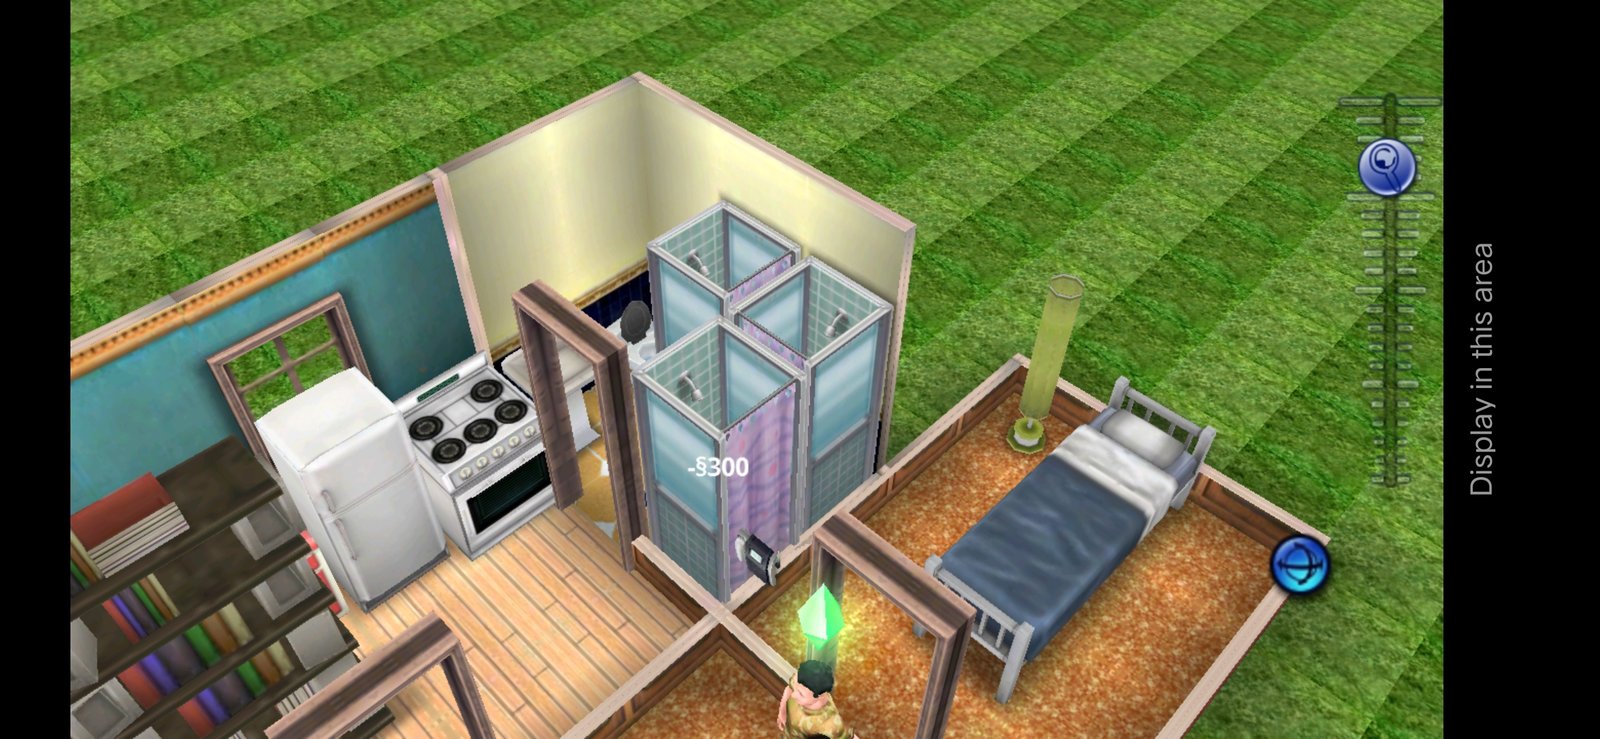 Download The Sims FreePlay MOD APK v5.81.0 for Android